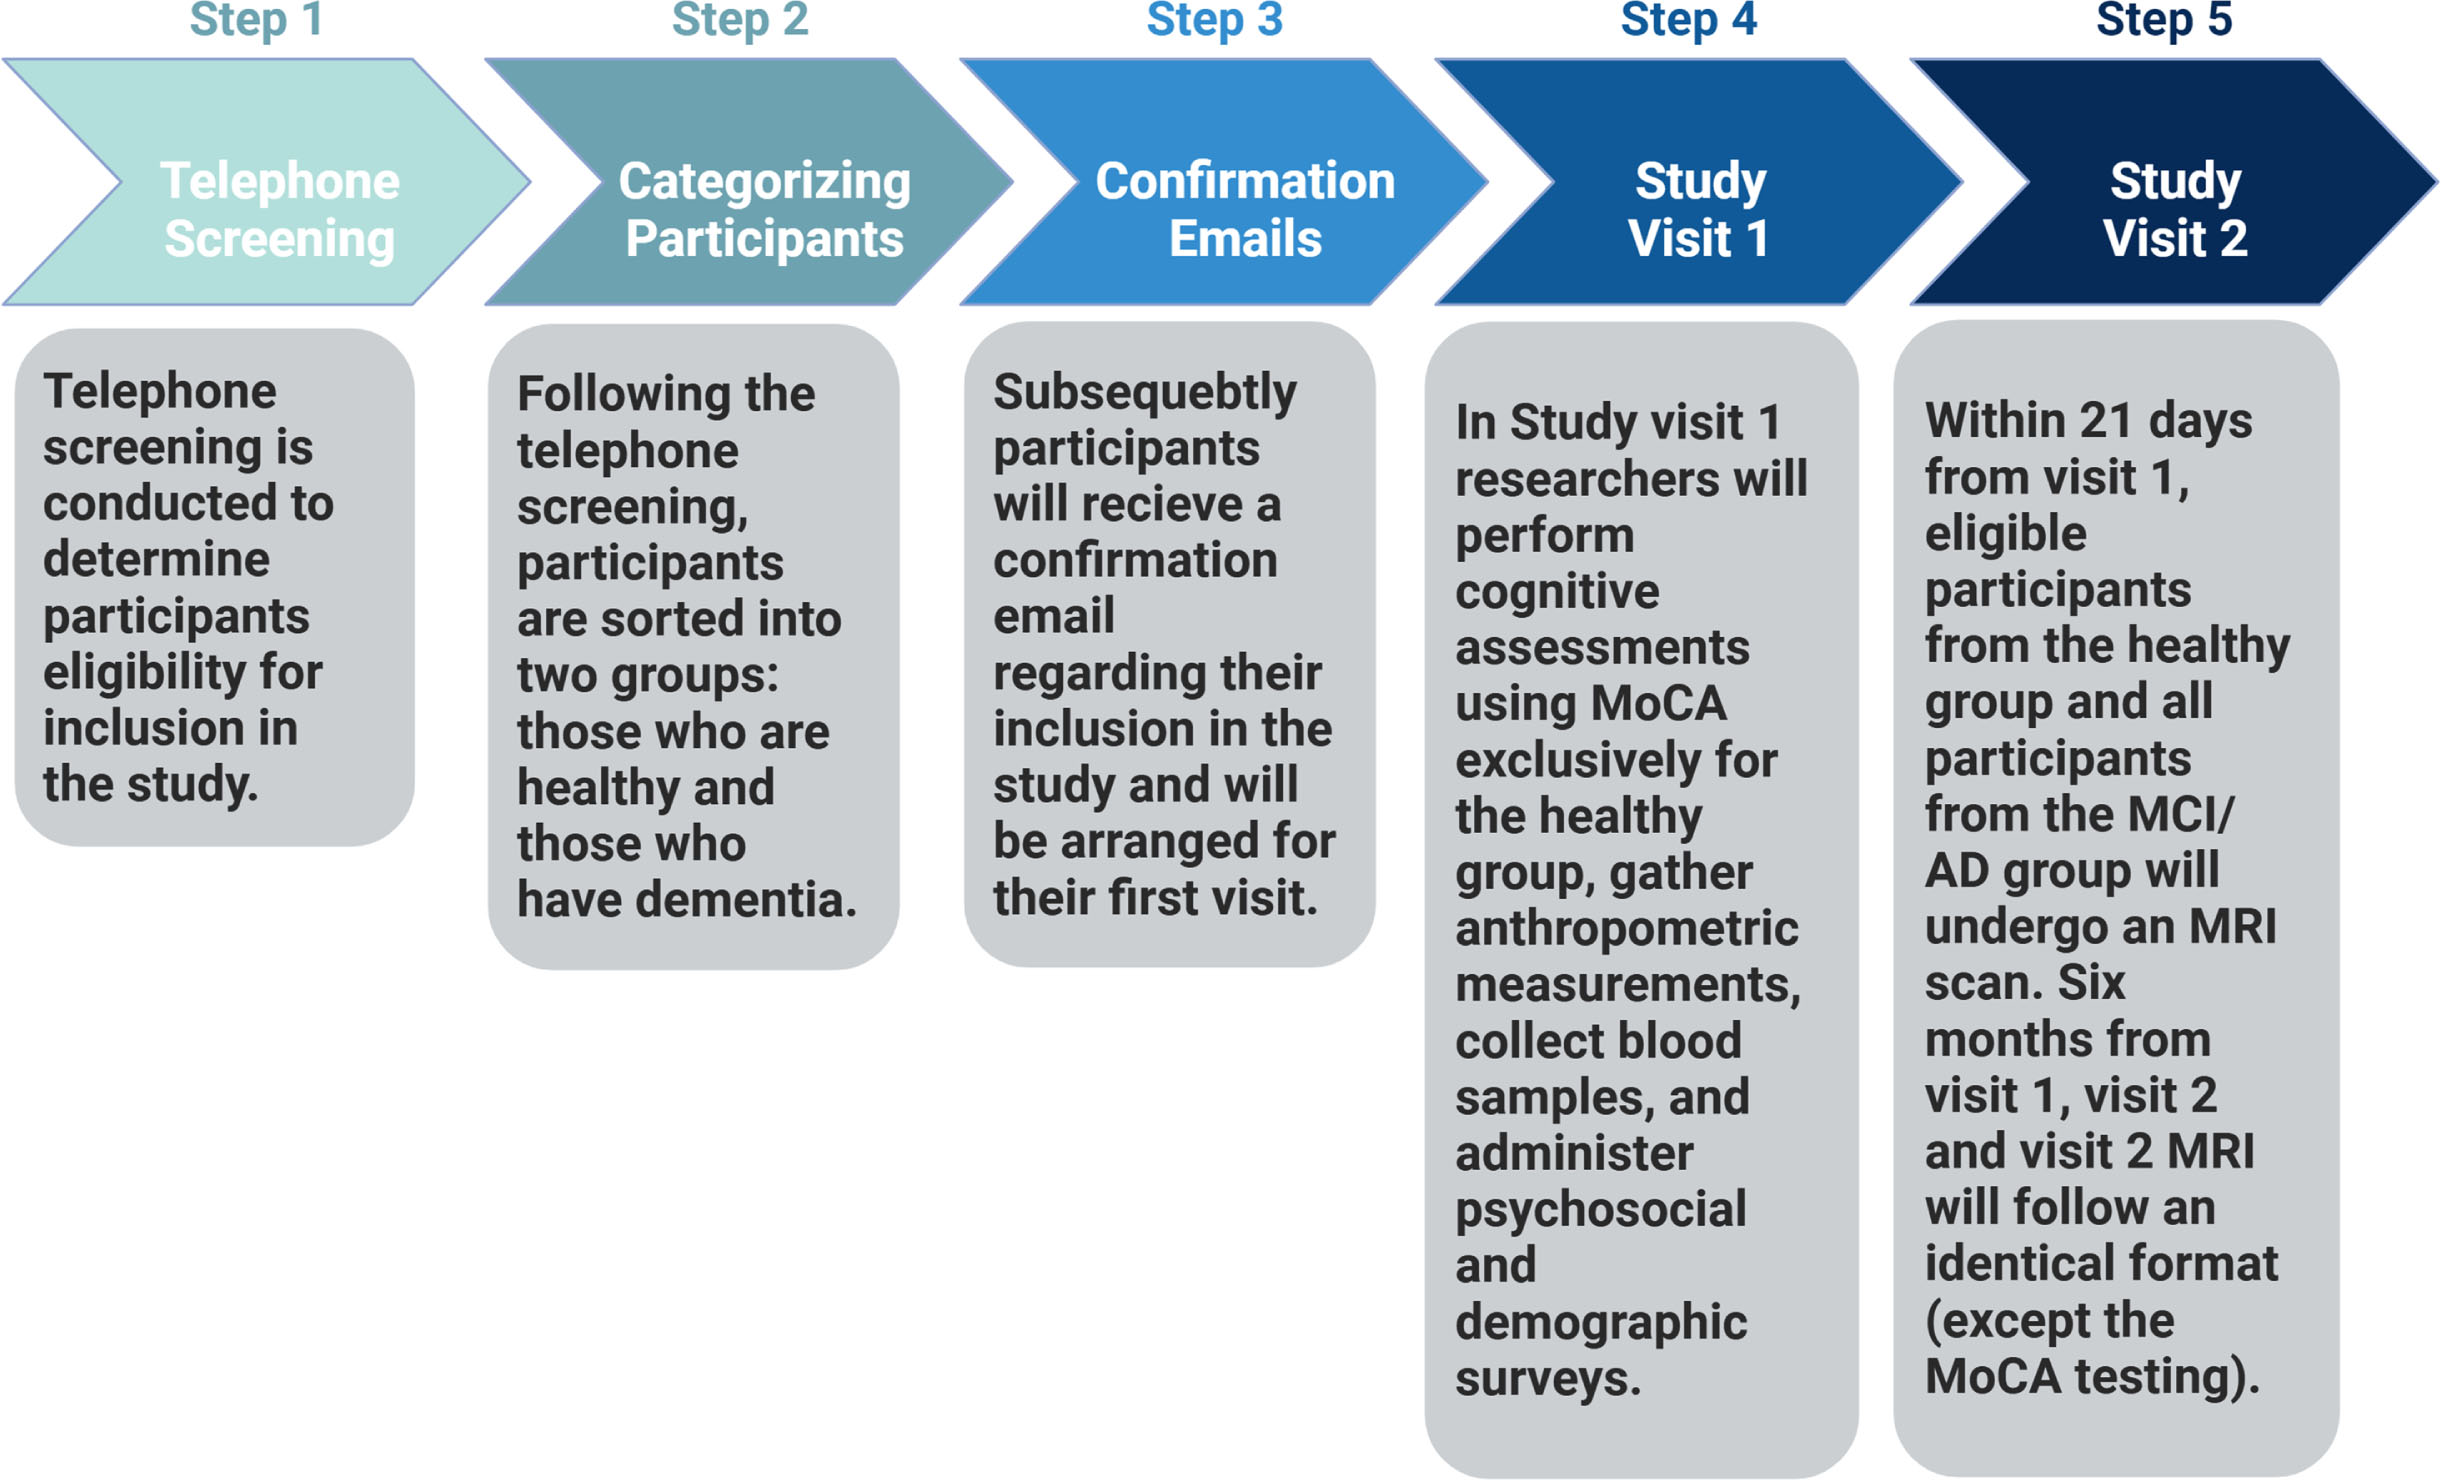 The research methodology illustrates the recruitment of participants from varied sources, their subsequent categorization based on inclusion/exclusion criteria, and the progression through study visits. The selected participants will undergo enrollment and informed consent, leading to Study Visit 1, which involves specific data collection points, and Study Visit 2, scheduled six months after their initial visit.